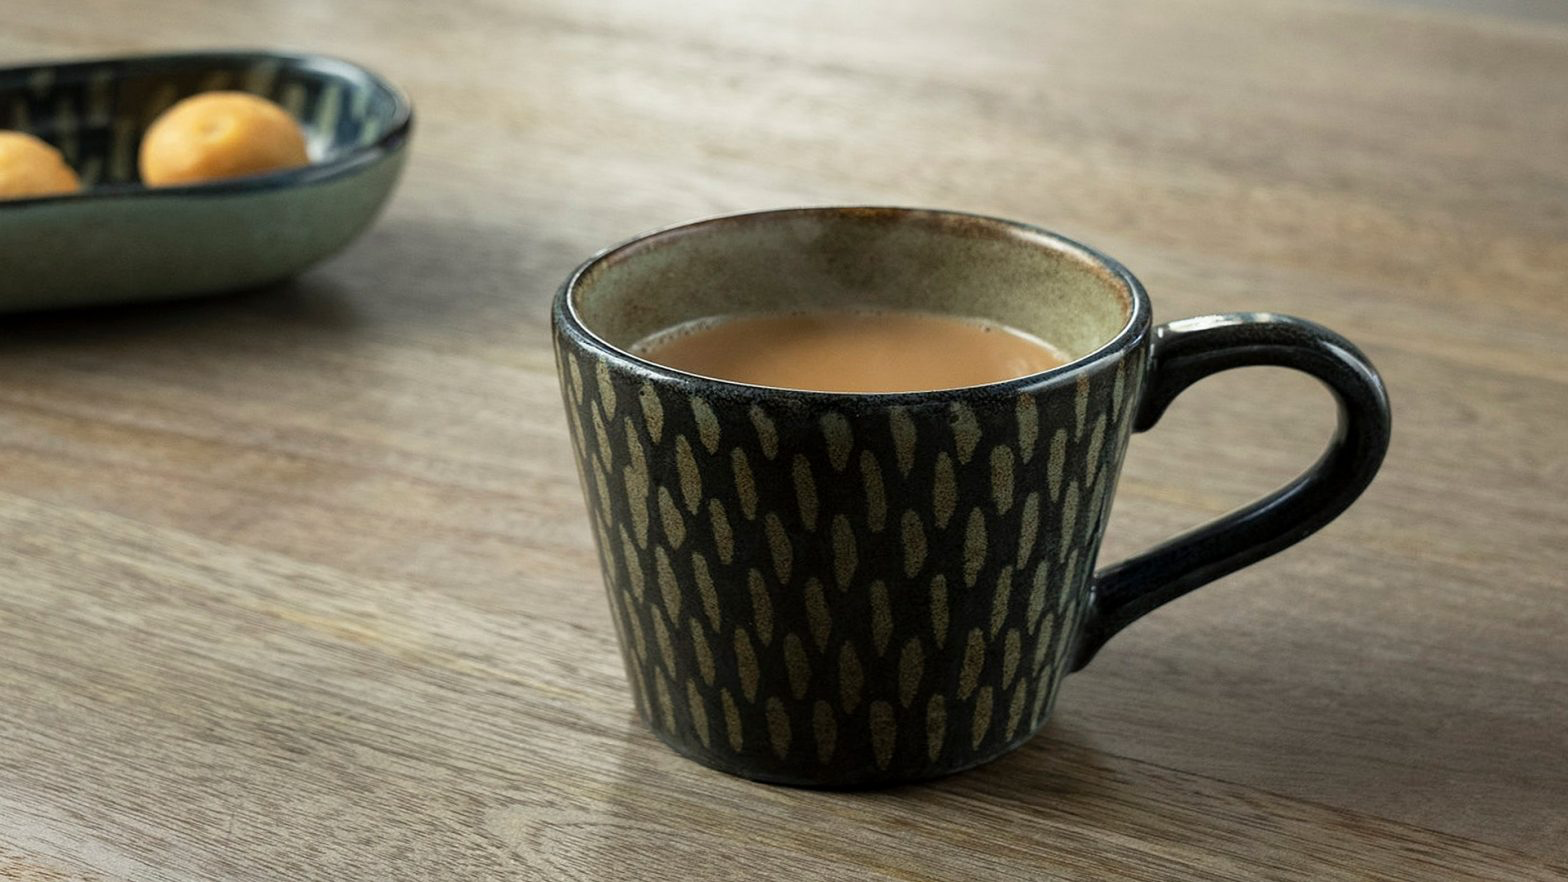 Ceramic or glass mugs: Which one is better?